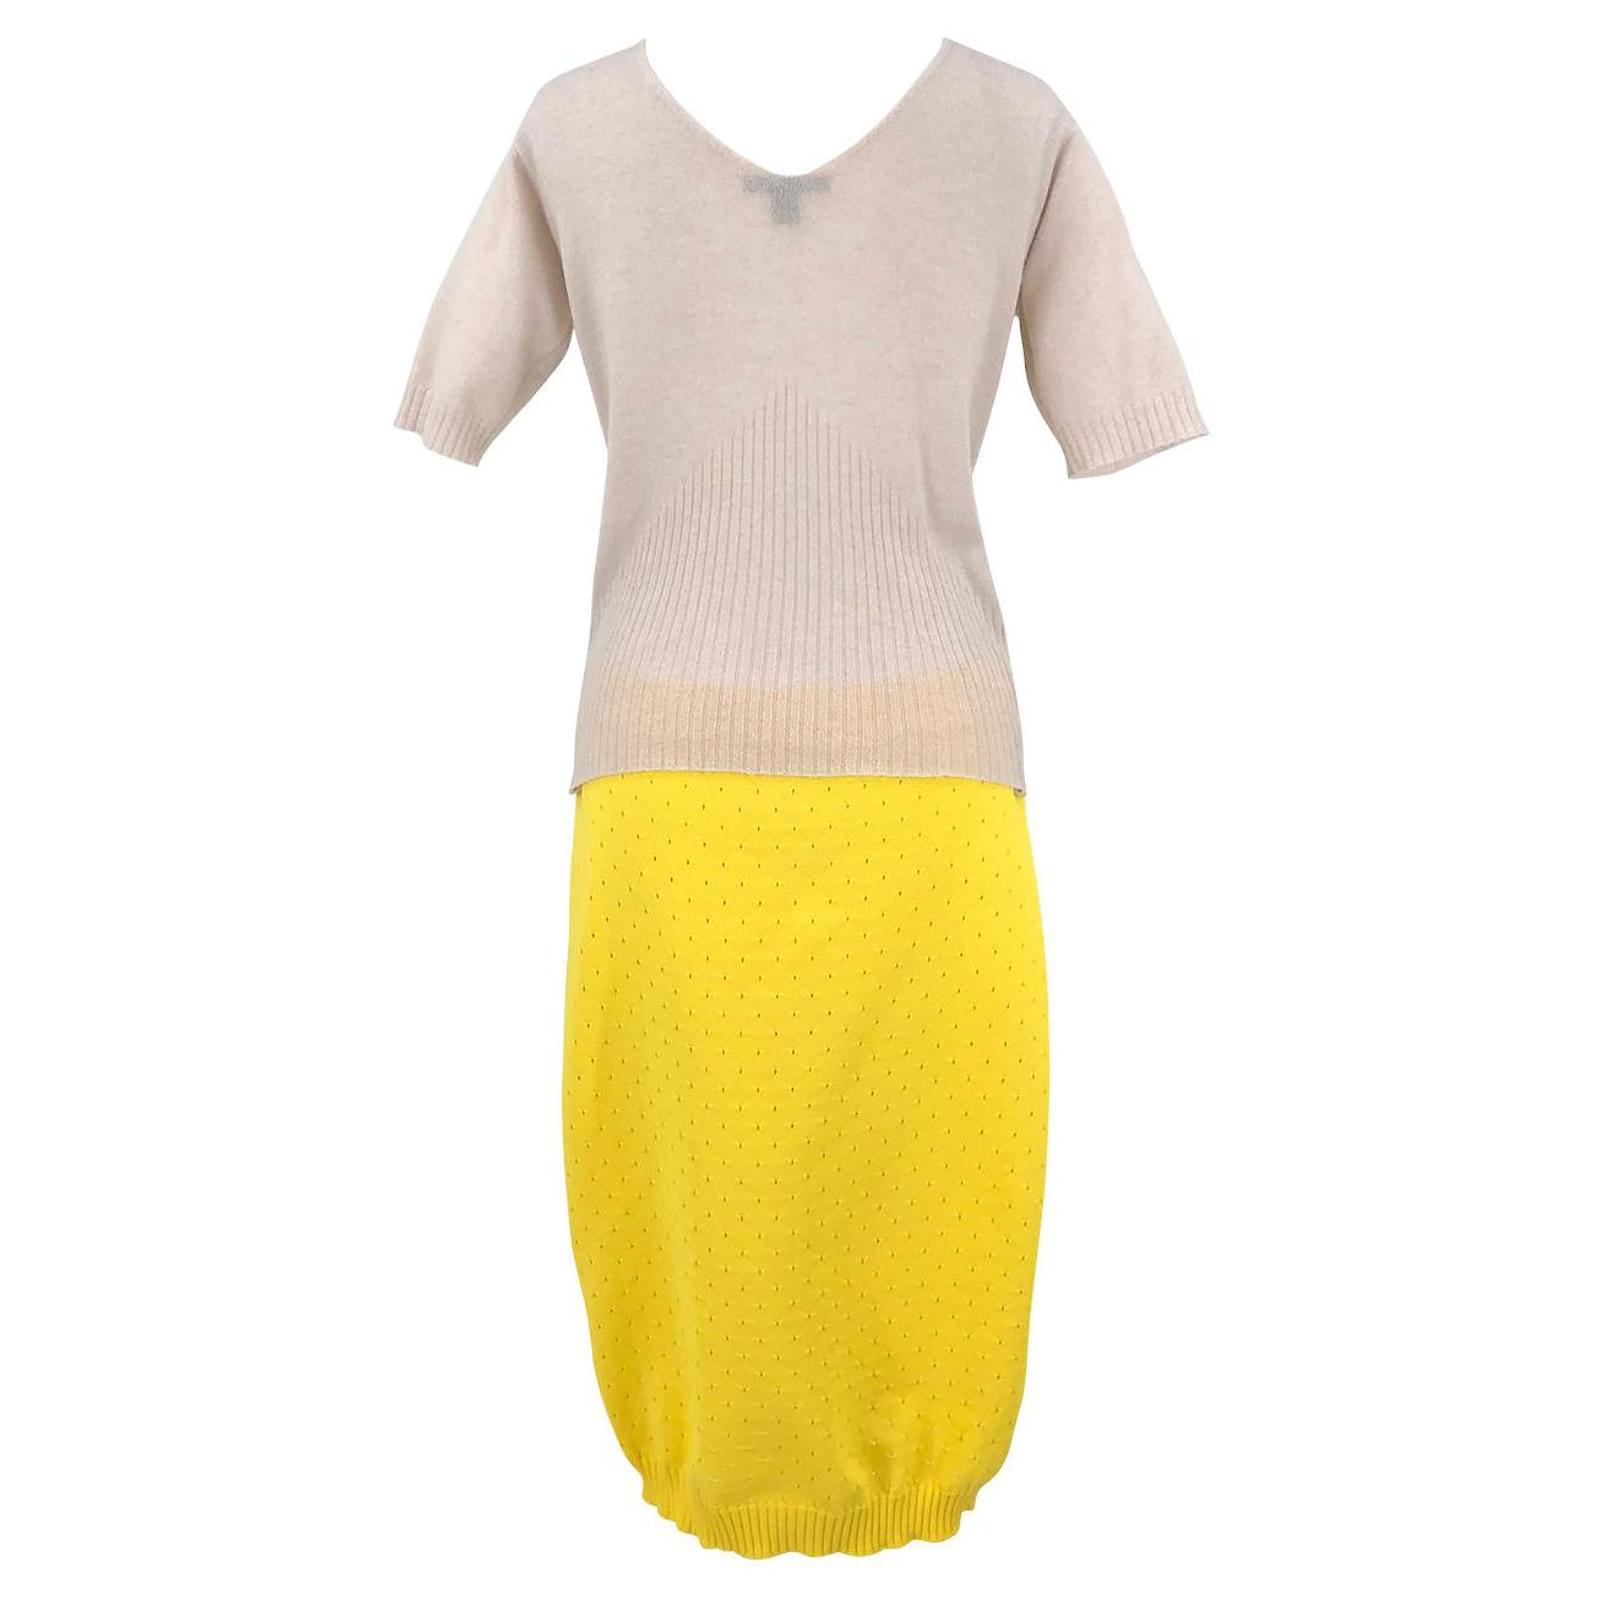 Louis Vuitton dress in gold cream cashmere with yellow skirt Wool